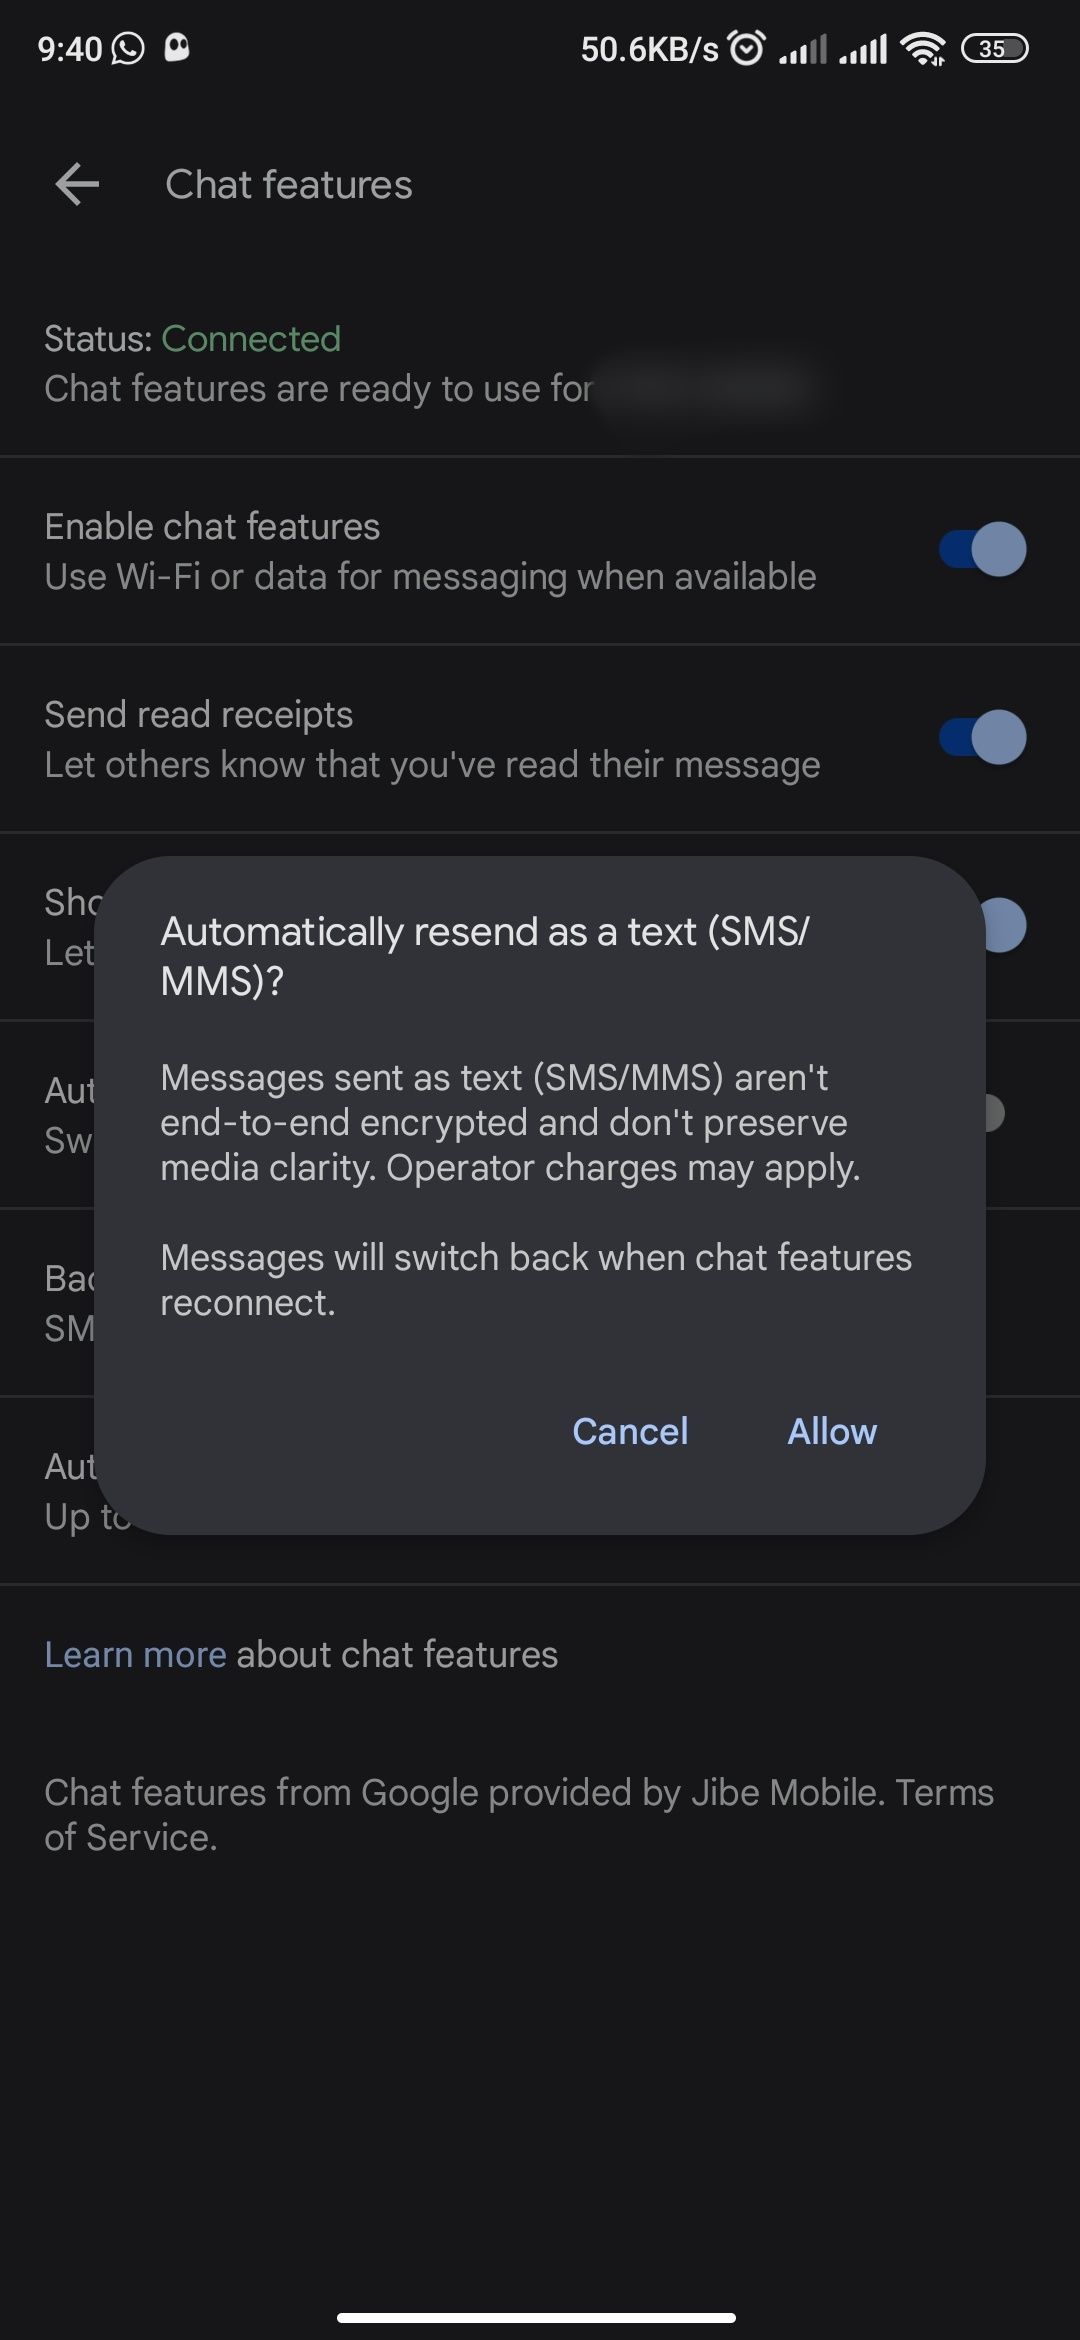 Enabling Automatically resend as text SMS and MMS in Google Messages